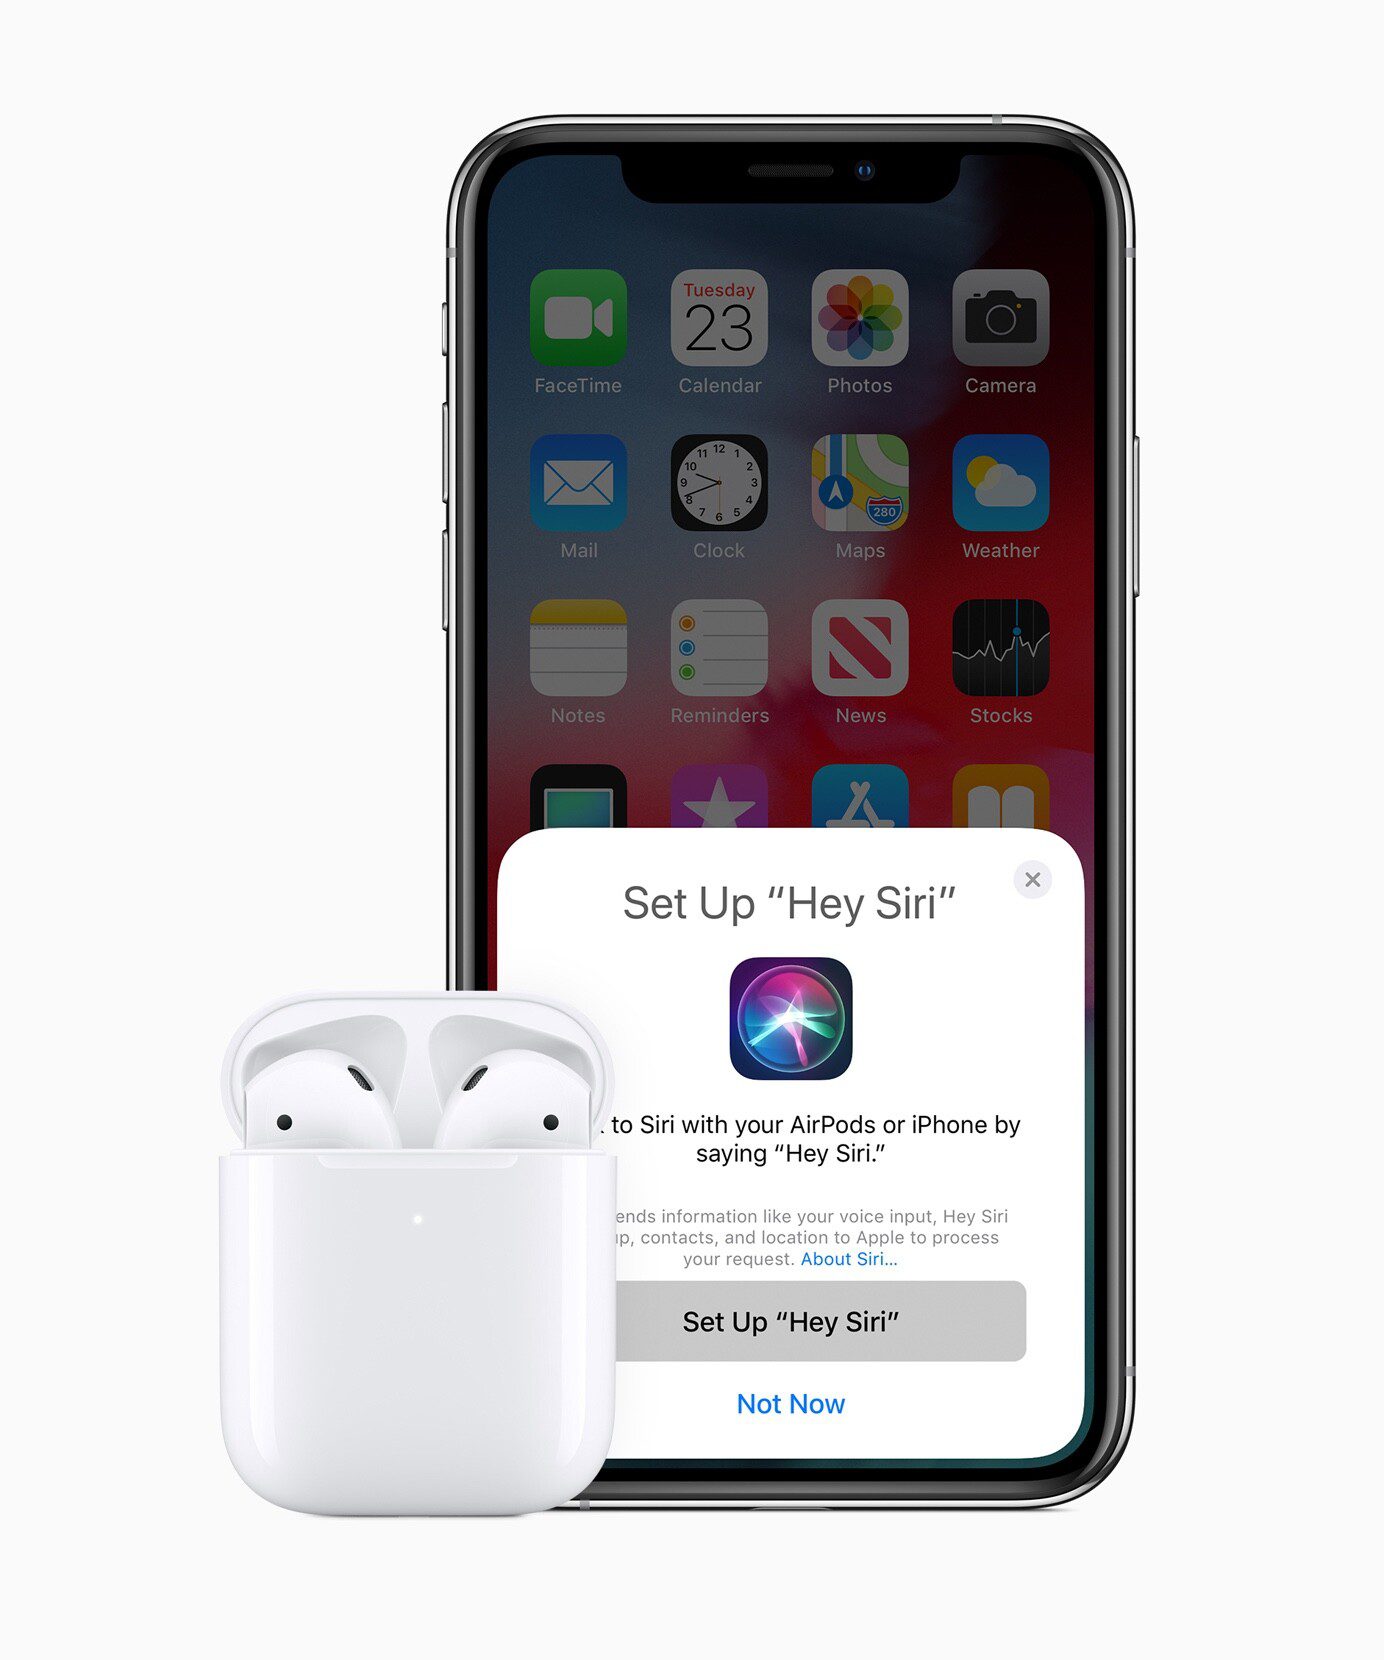 AirPods in case next to iPhone.  